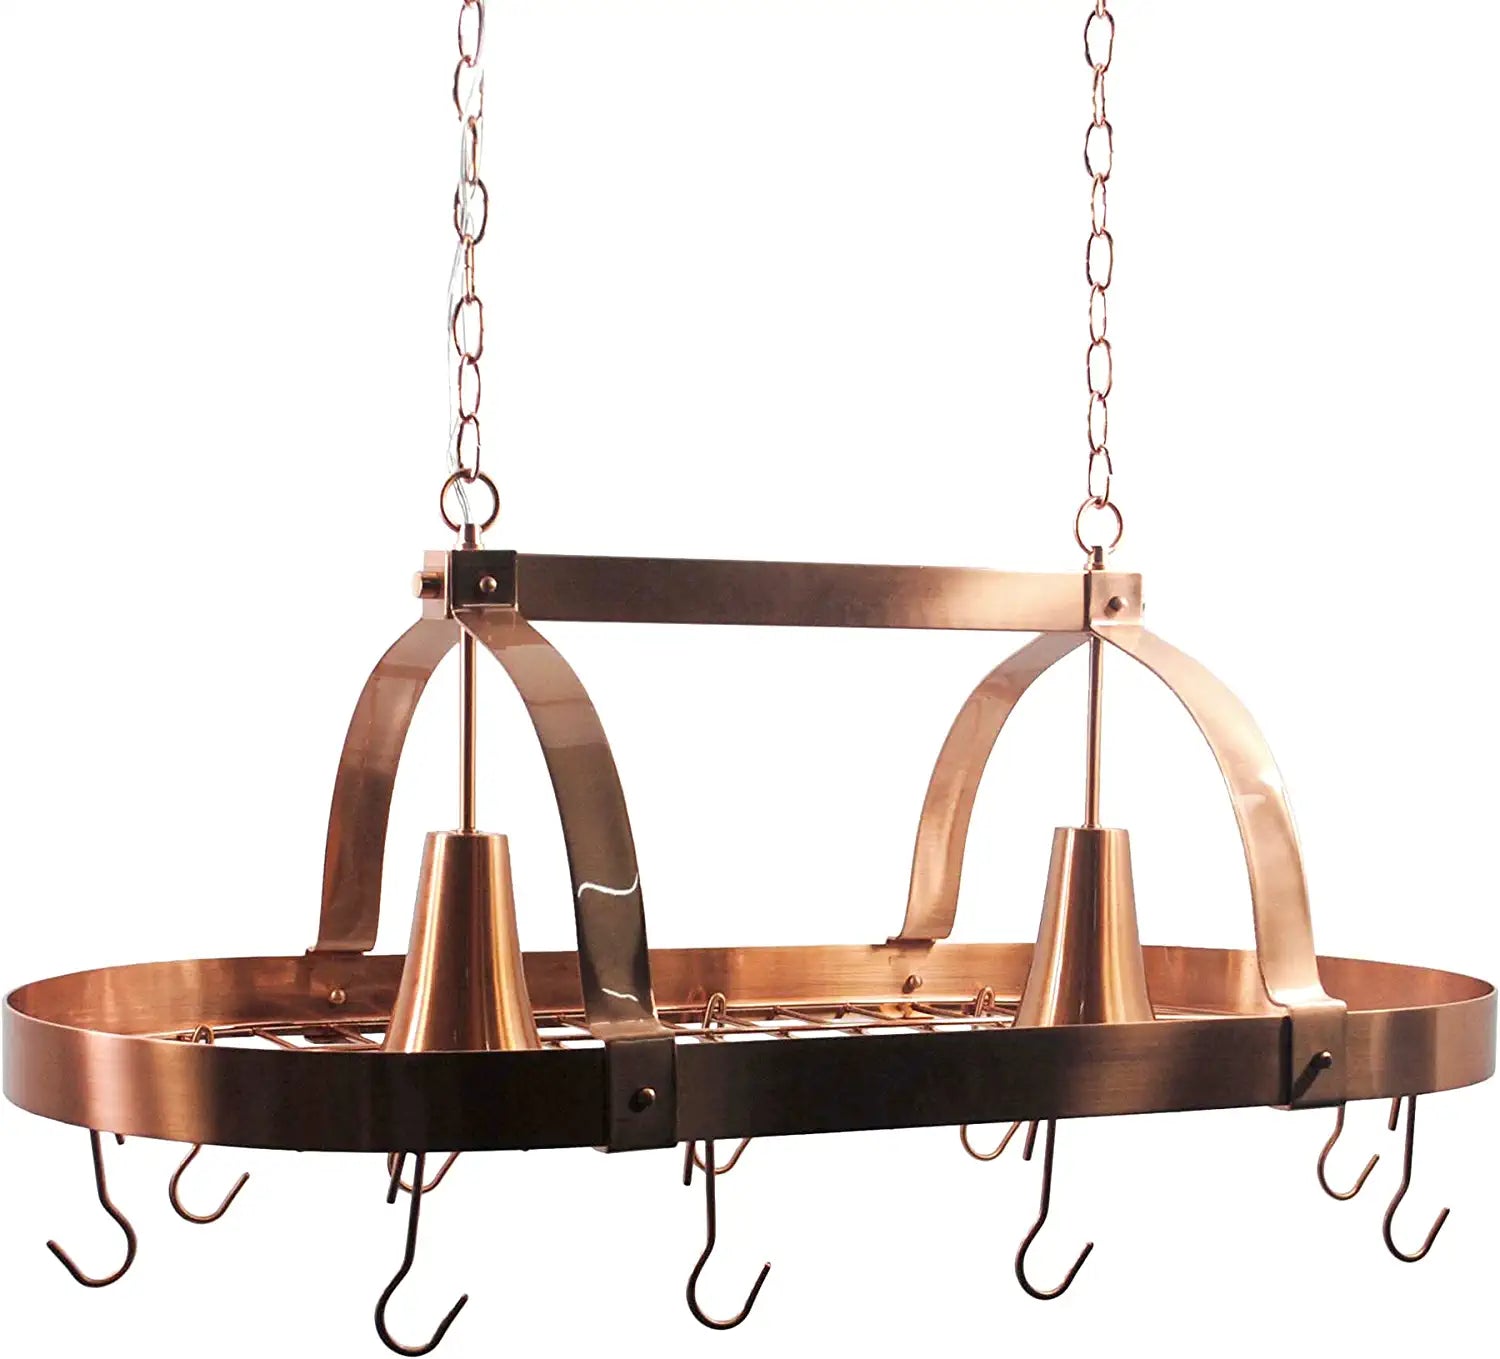 Elegant Designs PR1000-ORB Home Collection 2 Light Kitchen Pot Rack with Downlights, Oil Rubbed Bronze